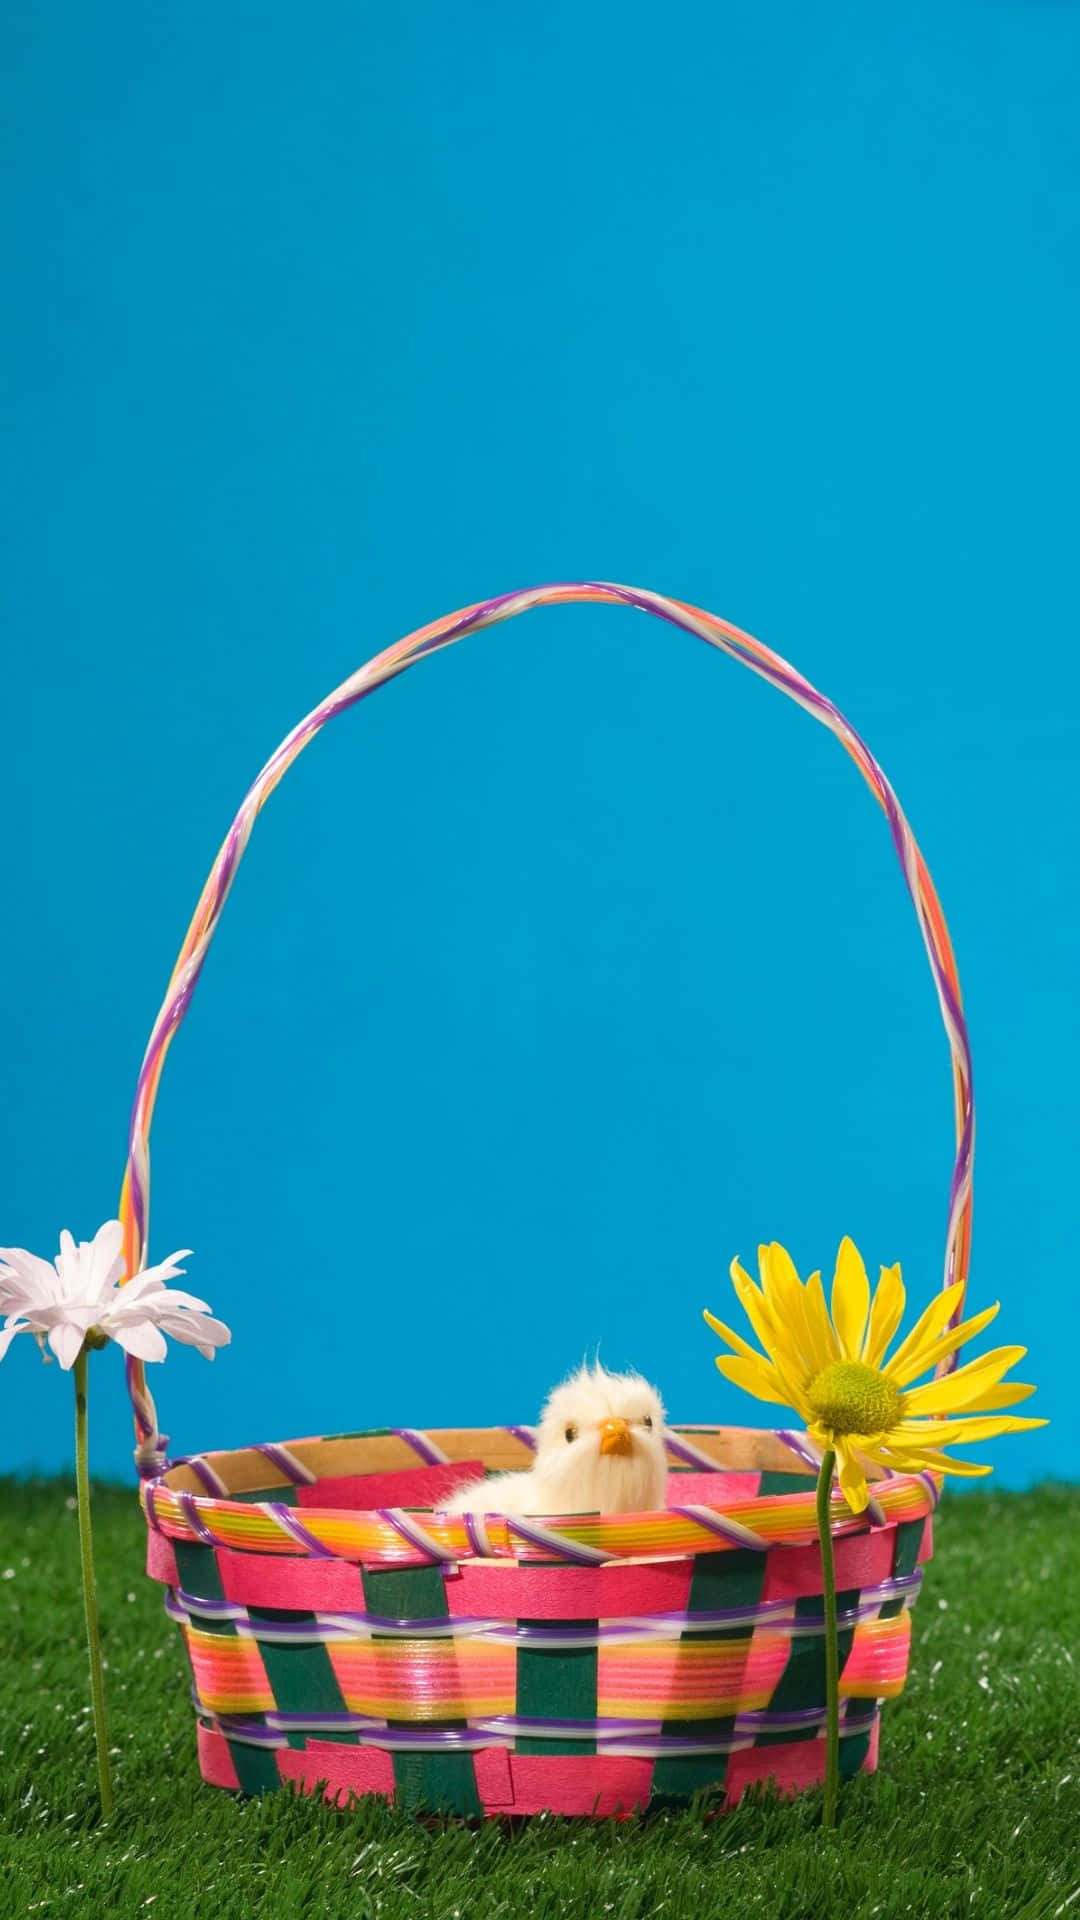 Express your gratitude this Easter with a bountiful basket of love! Wallpaper